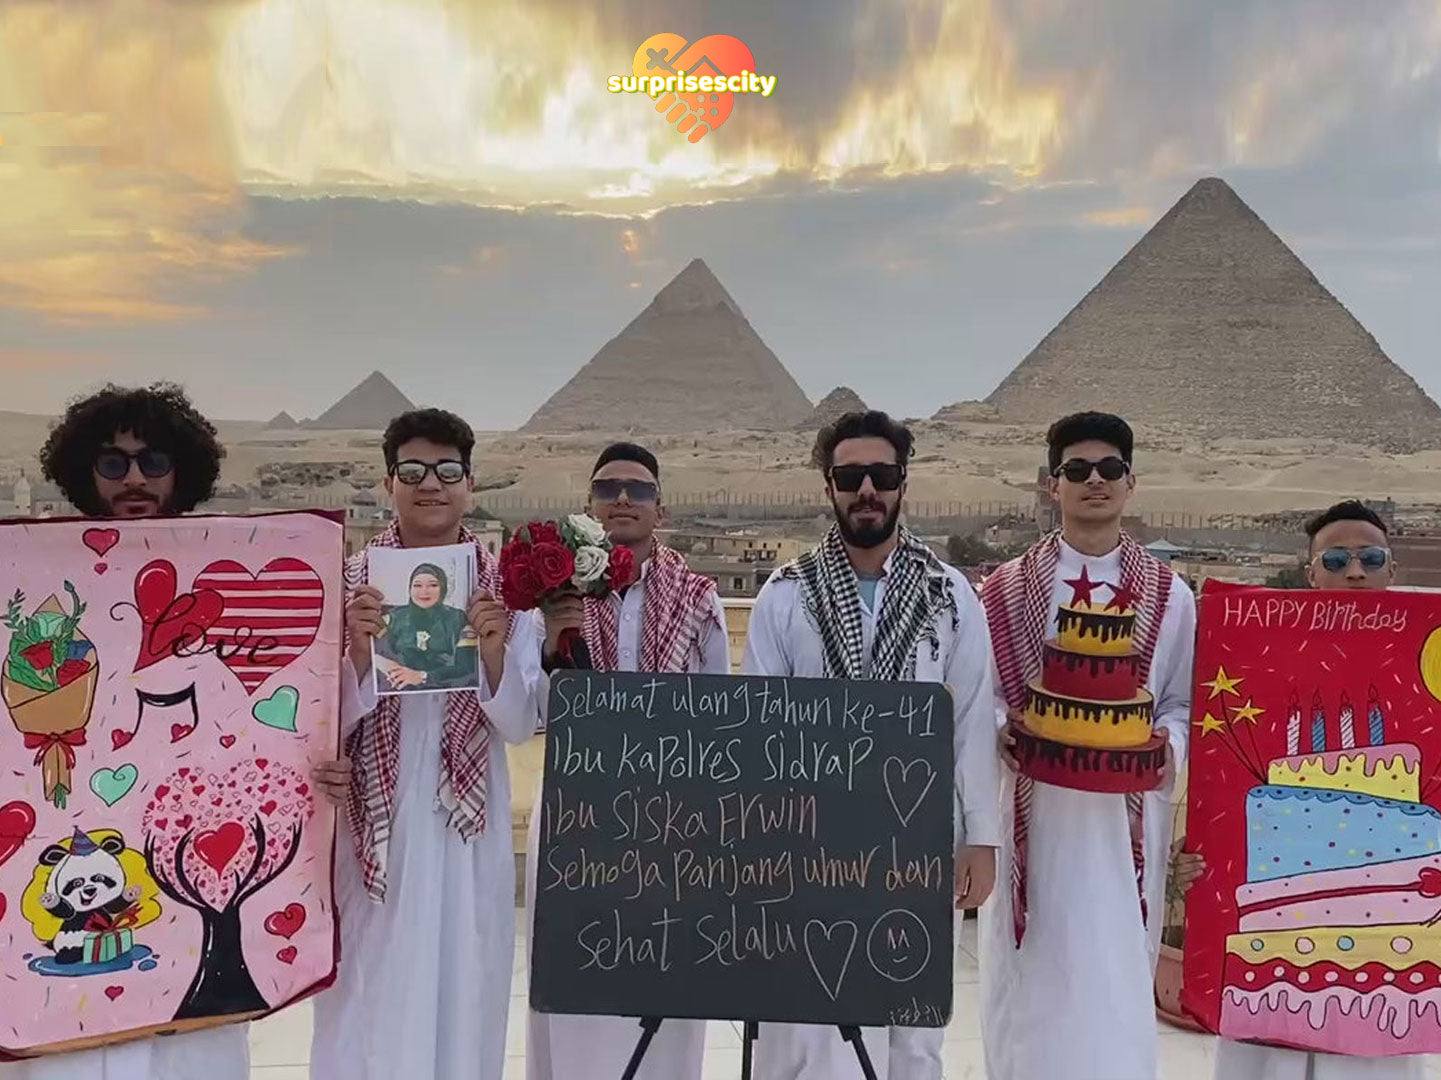 Video Message From Africa - Egyptian